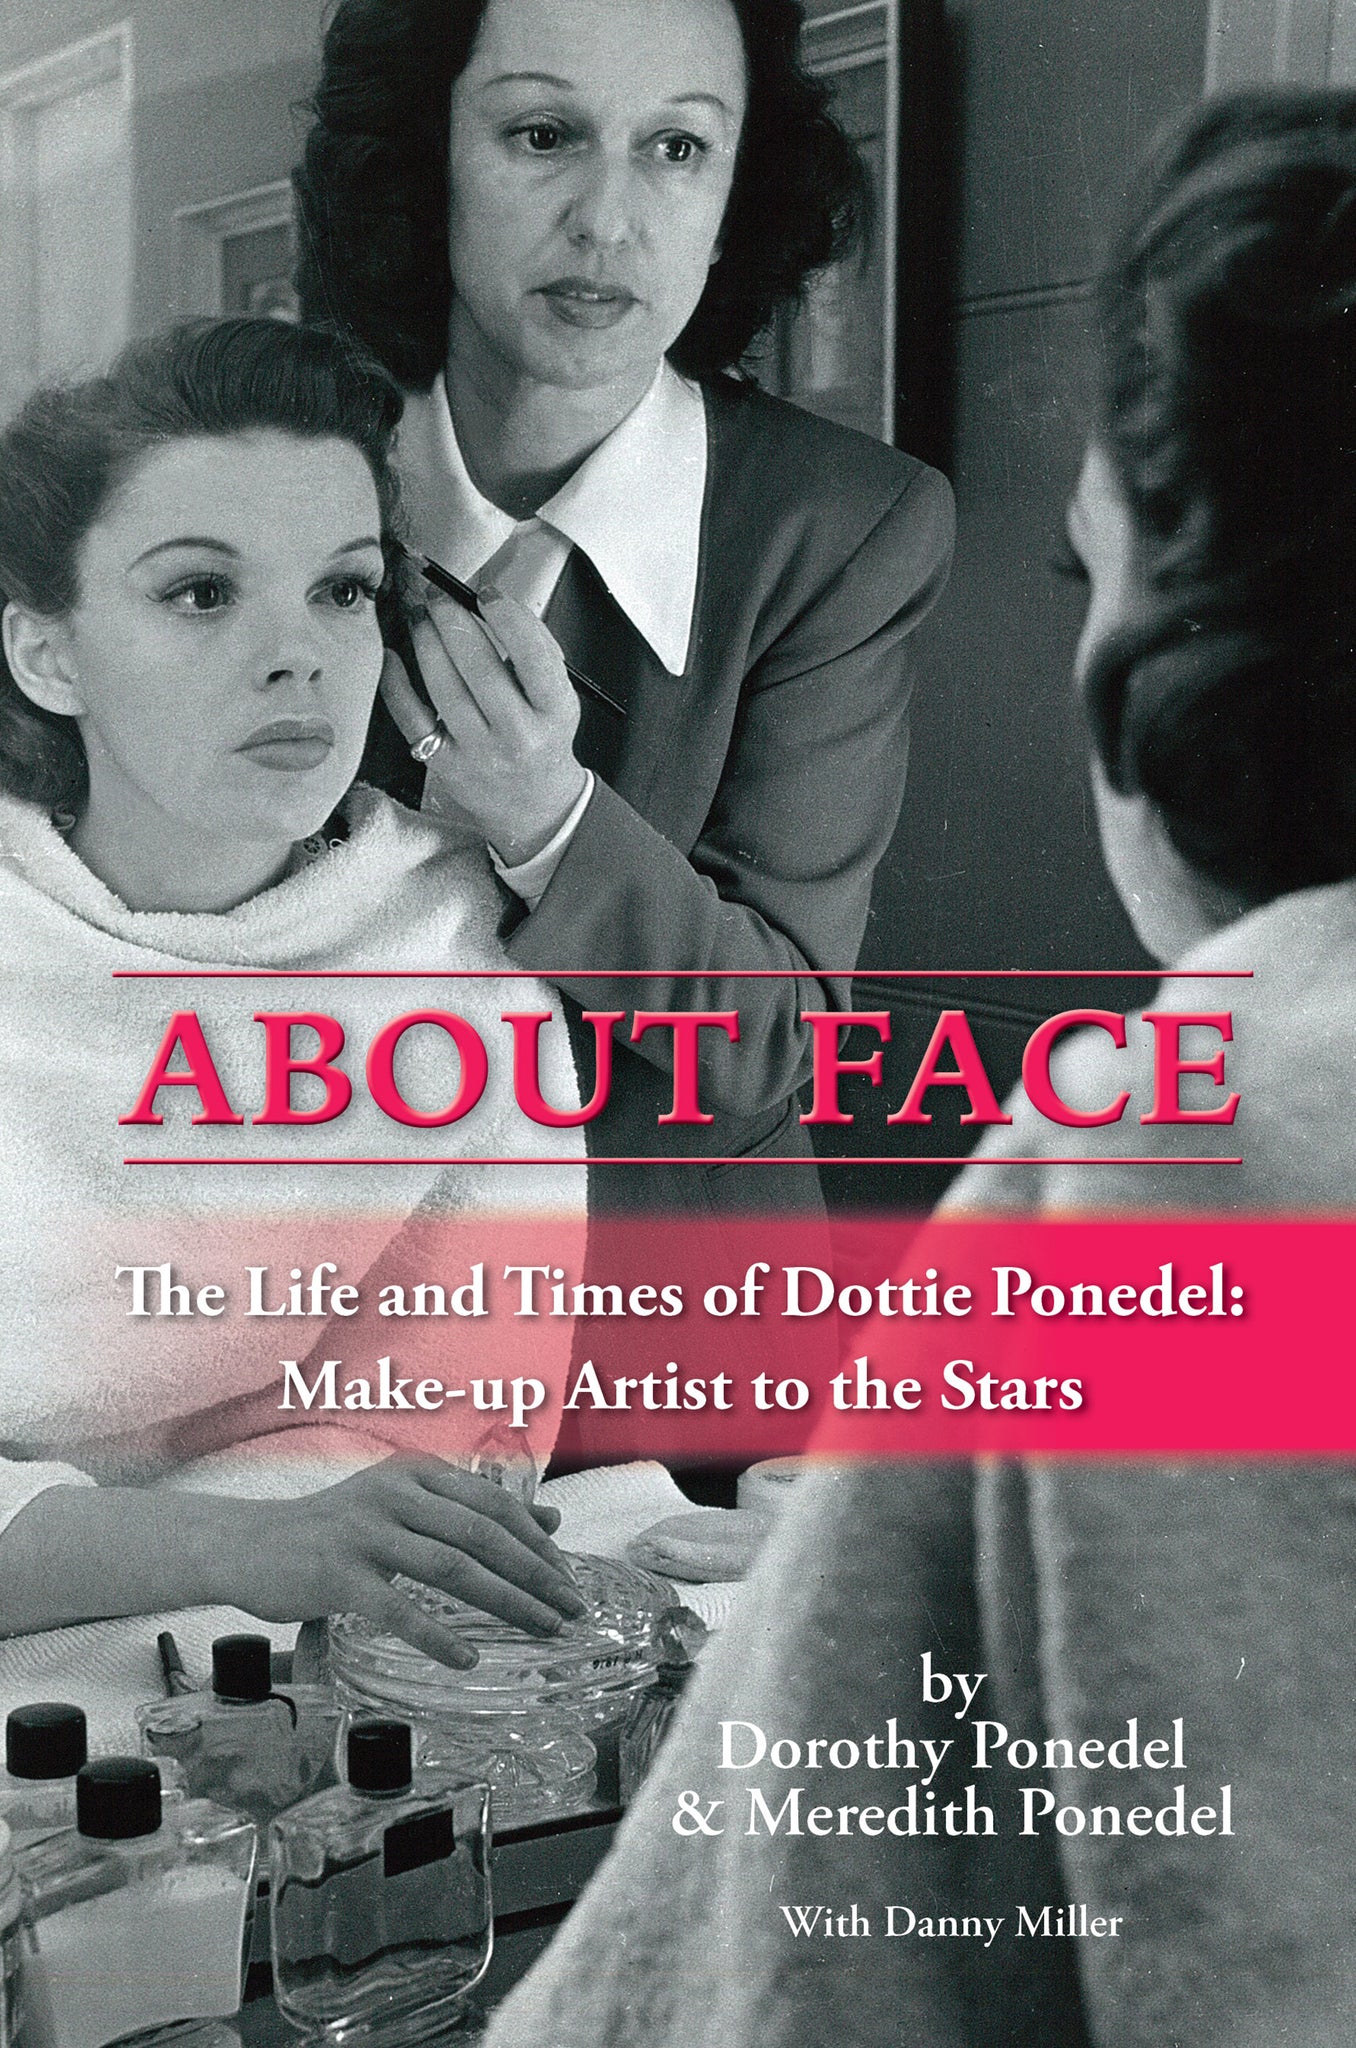 About Face: The Life and Times of Dottie Ponedel, Make-up Artist to the Stars  (ebook) - BearManor Manor